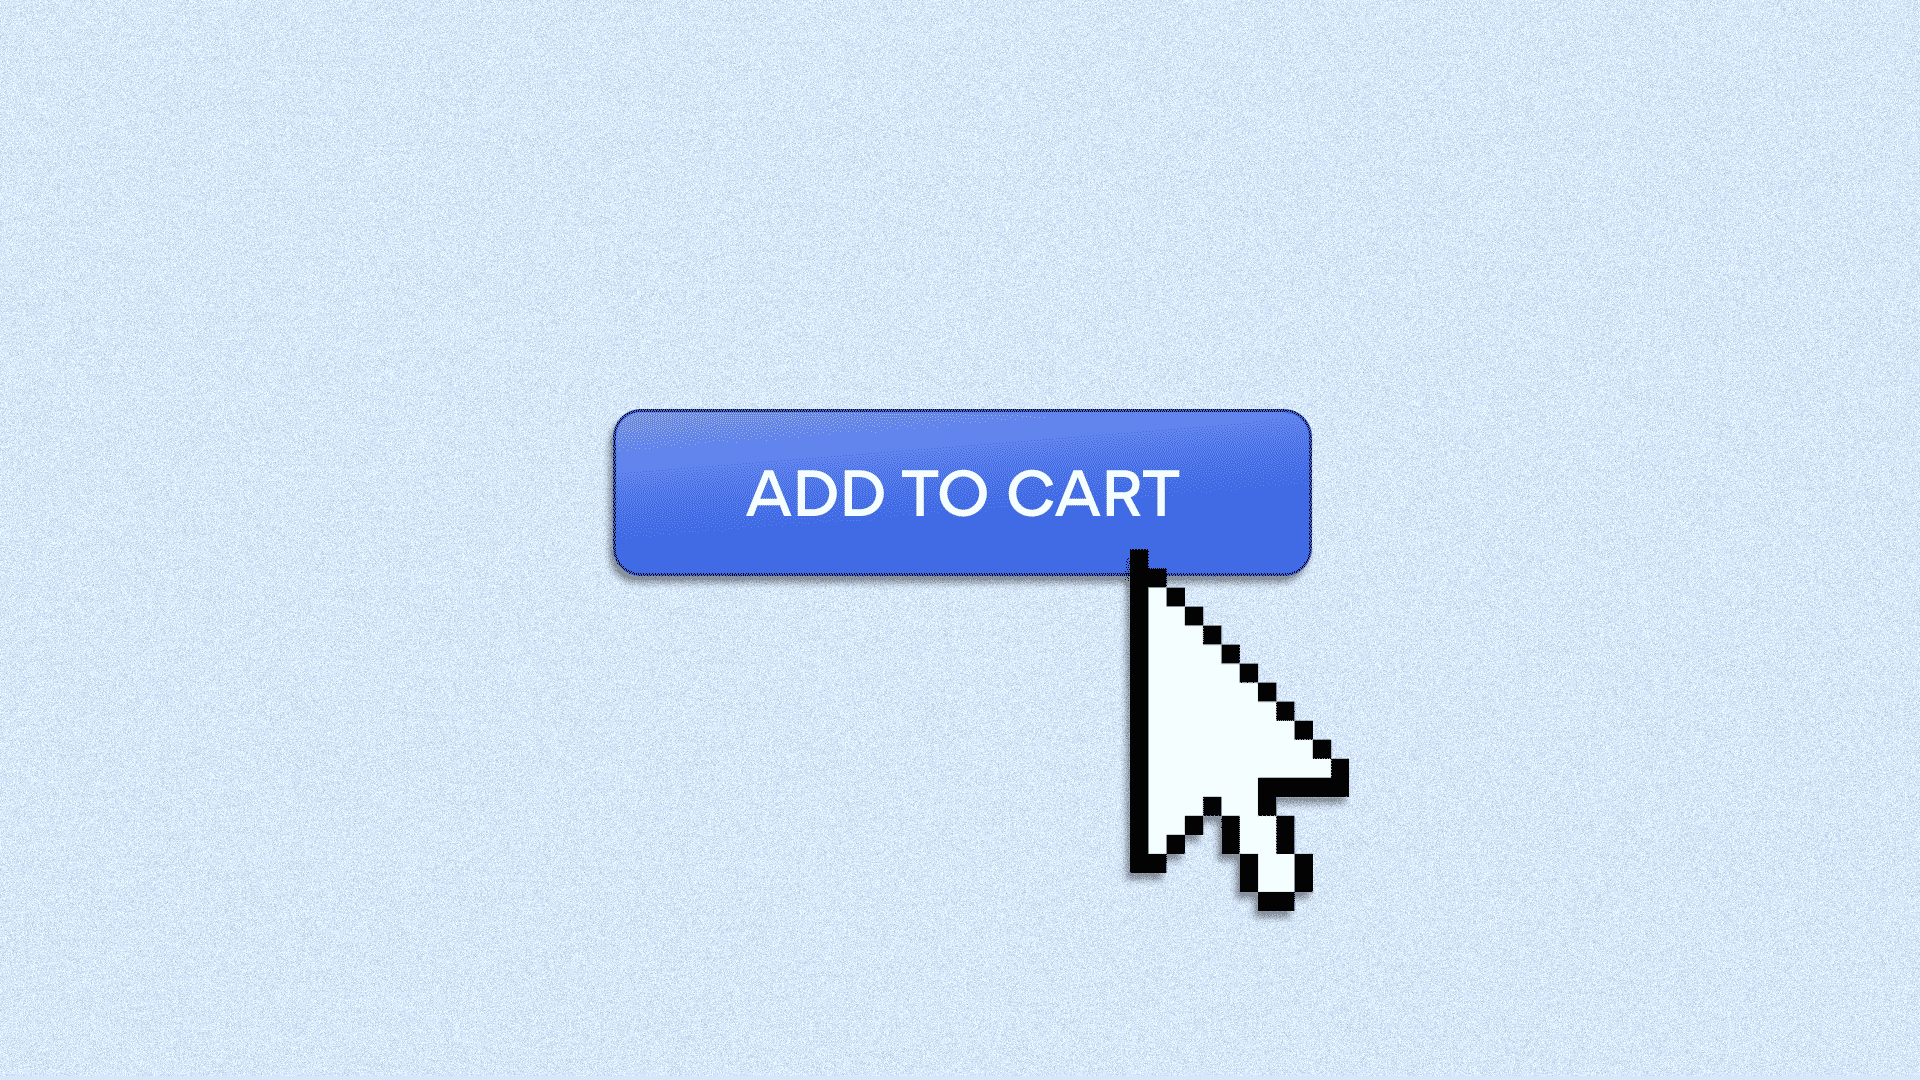 Animated GIF of "add to cart" icon cycling through various languages